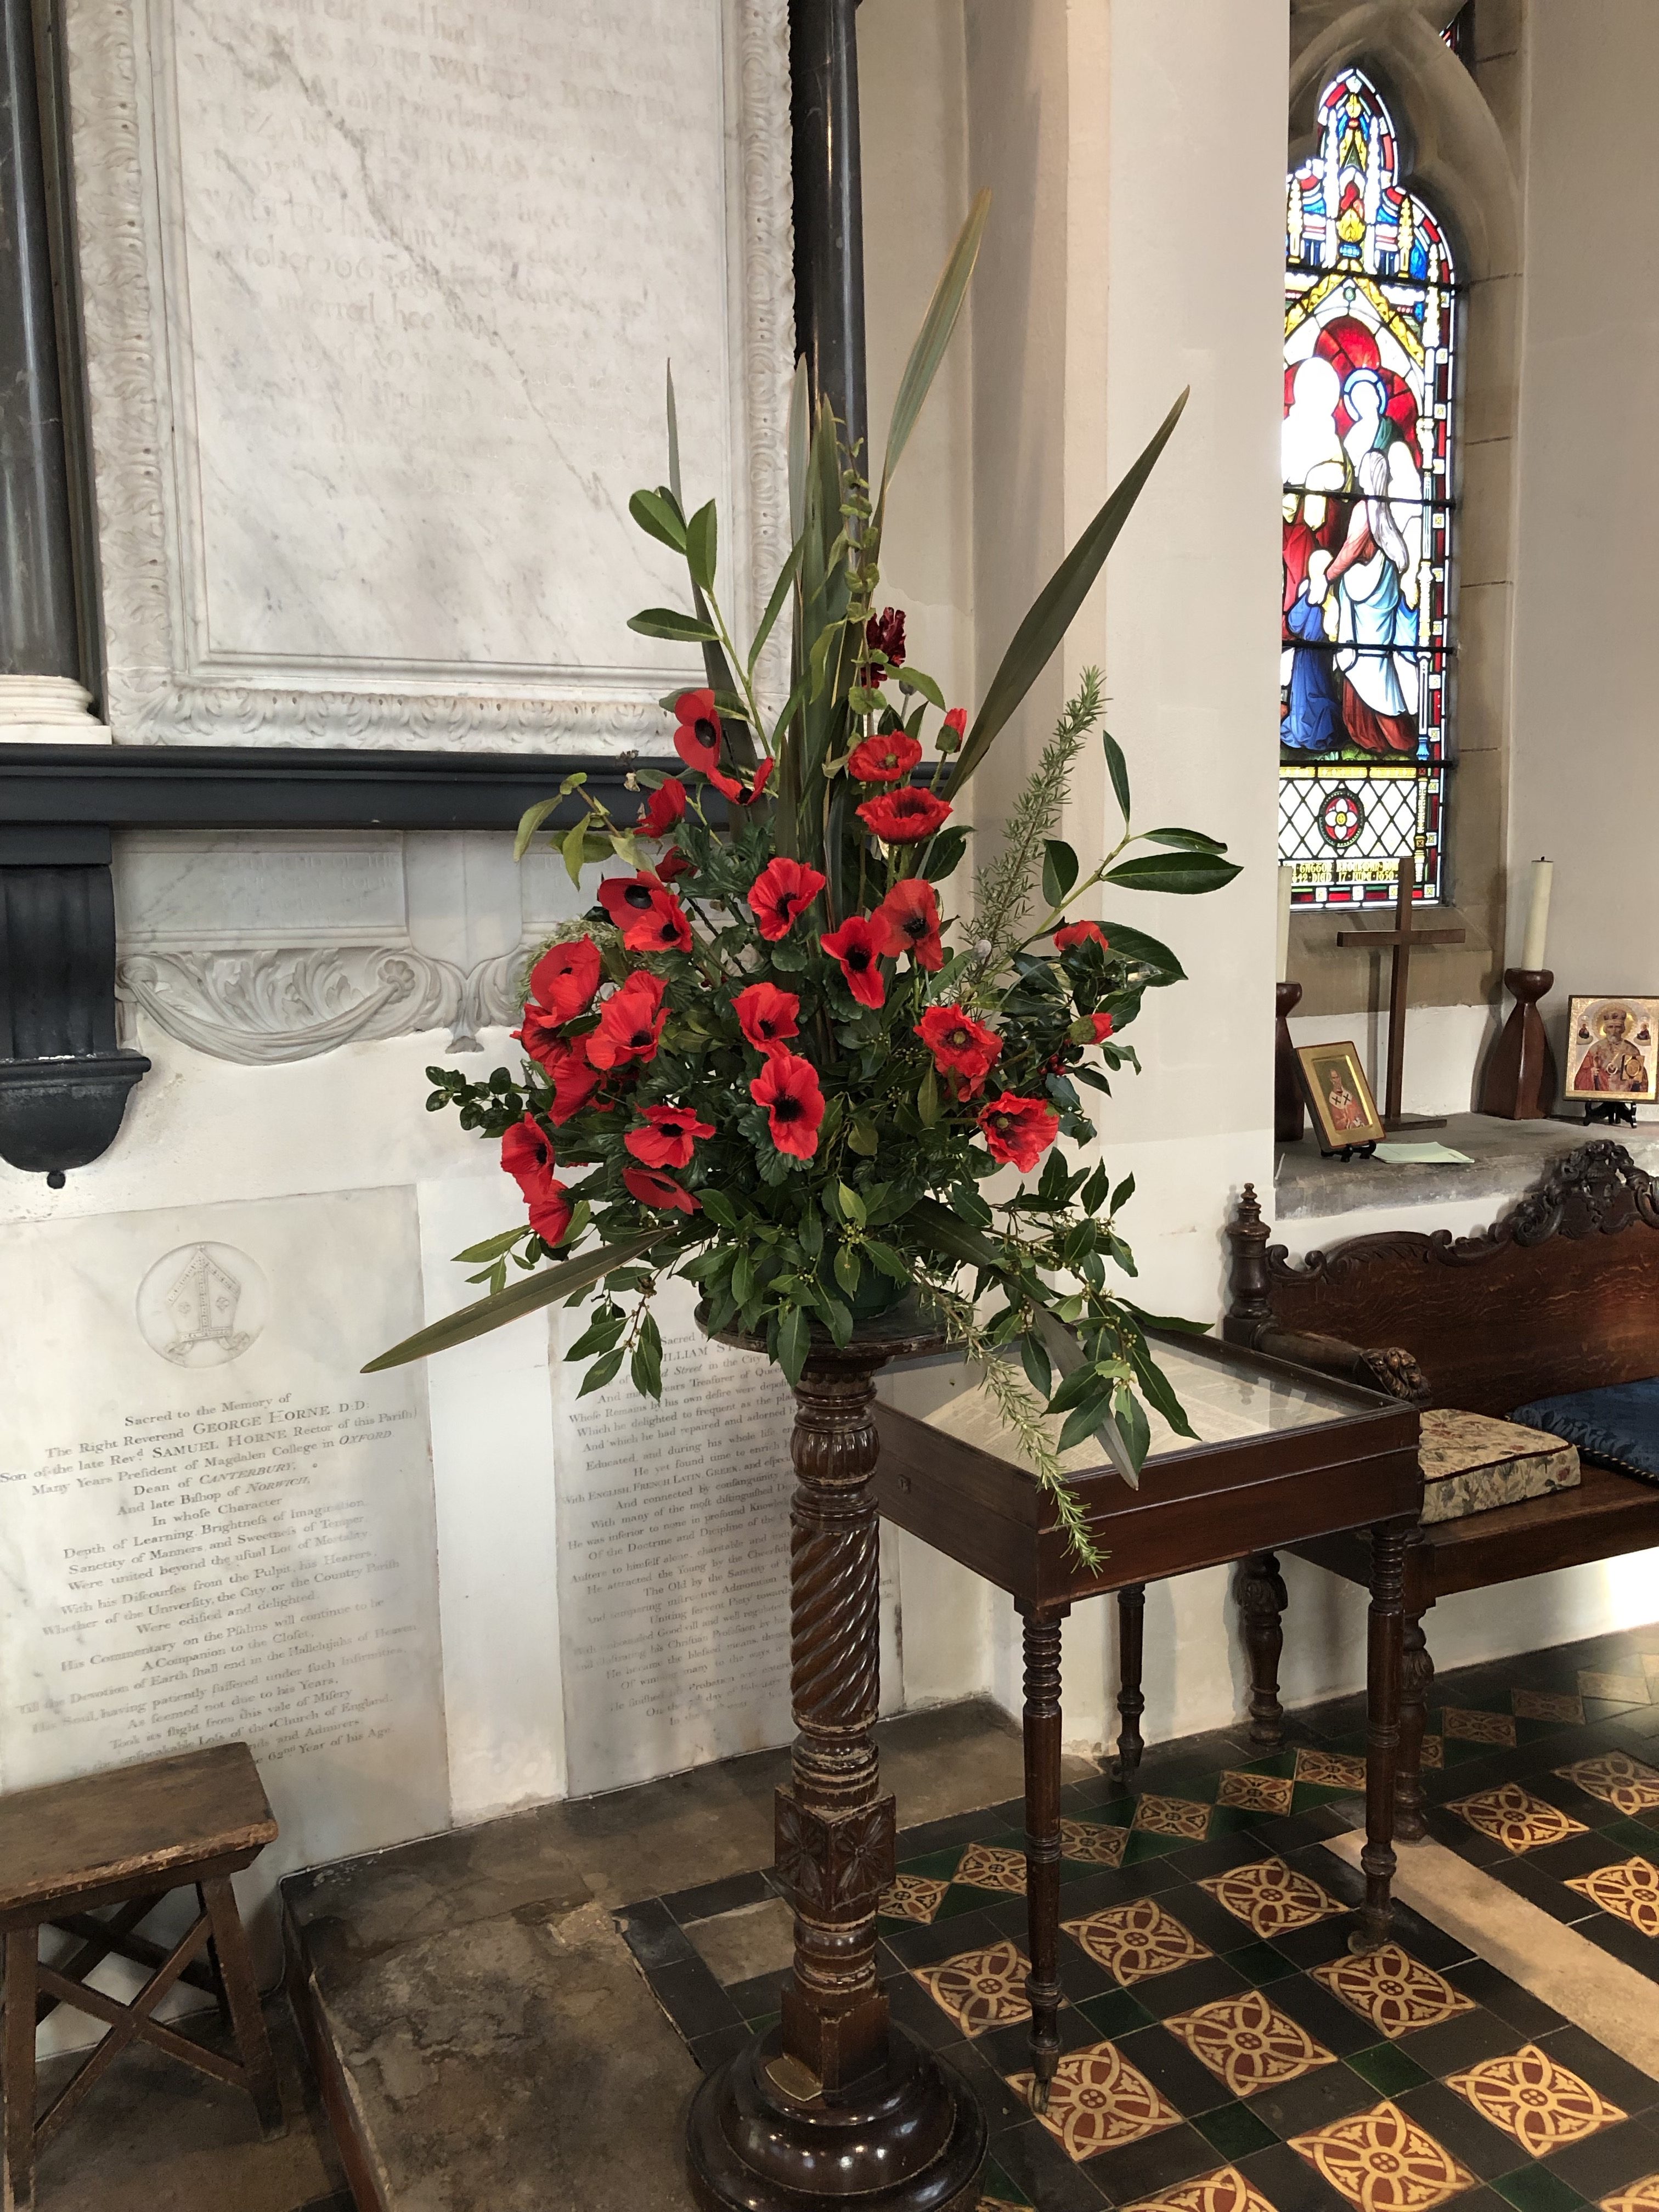 Remembrance Flowers and book at St Nicholas Otham